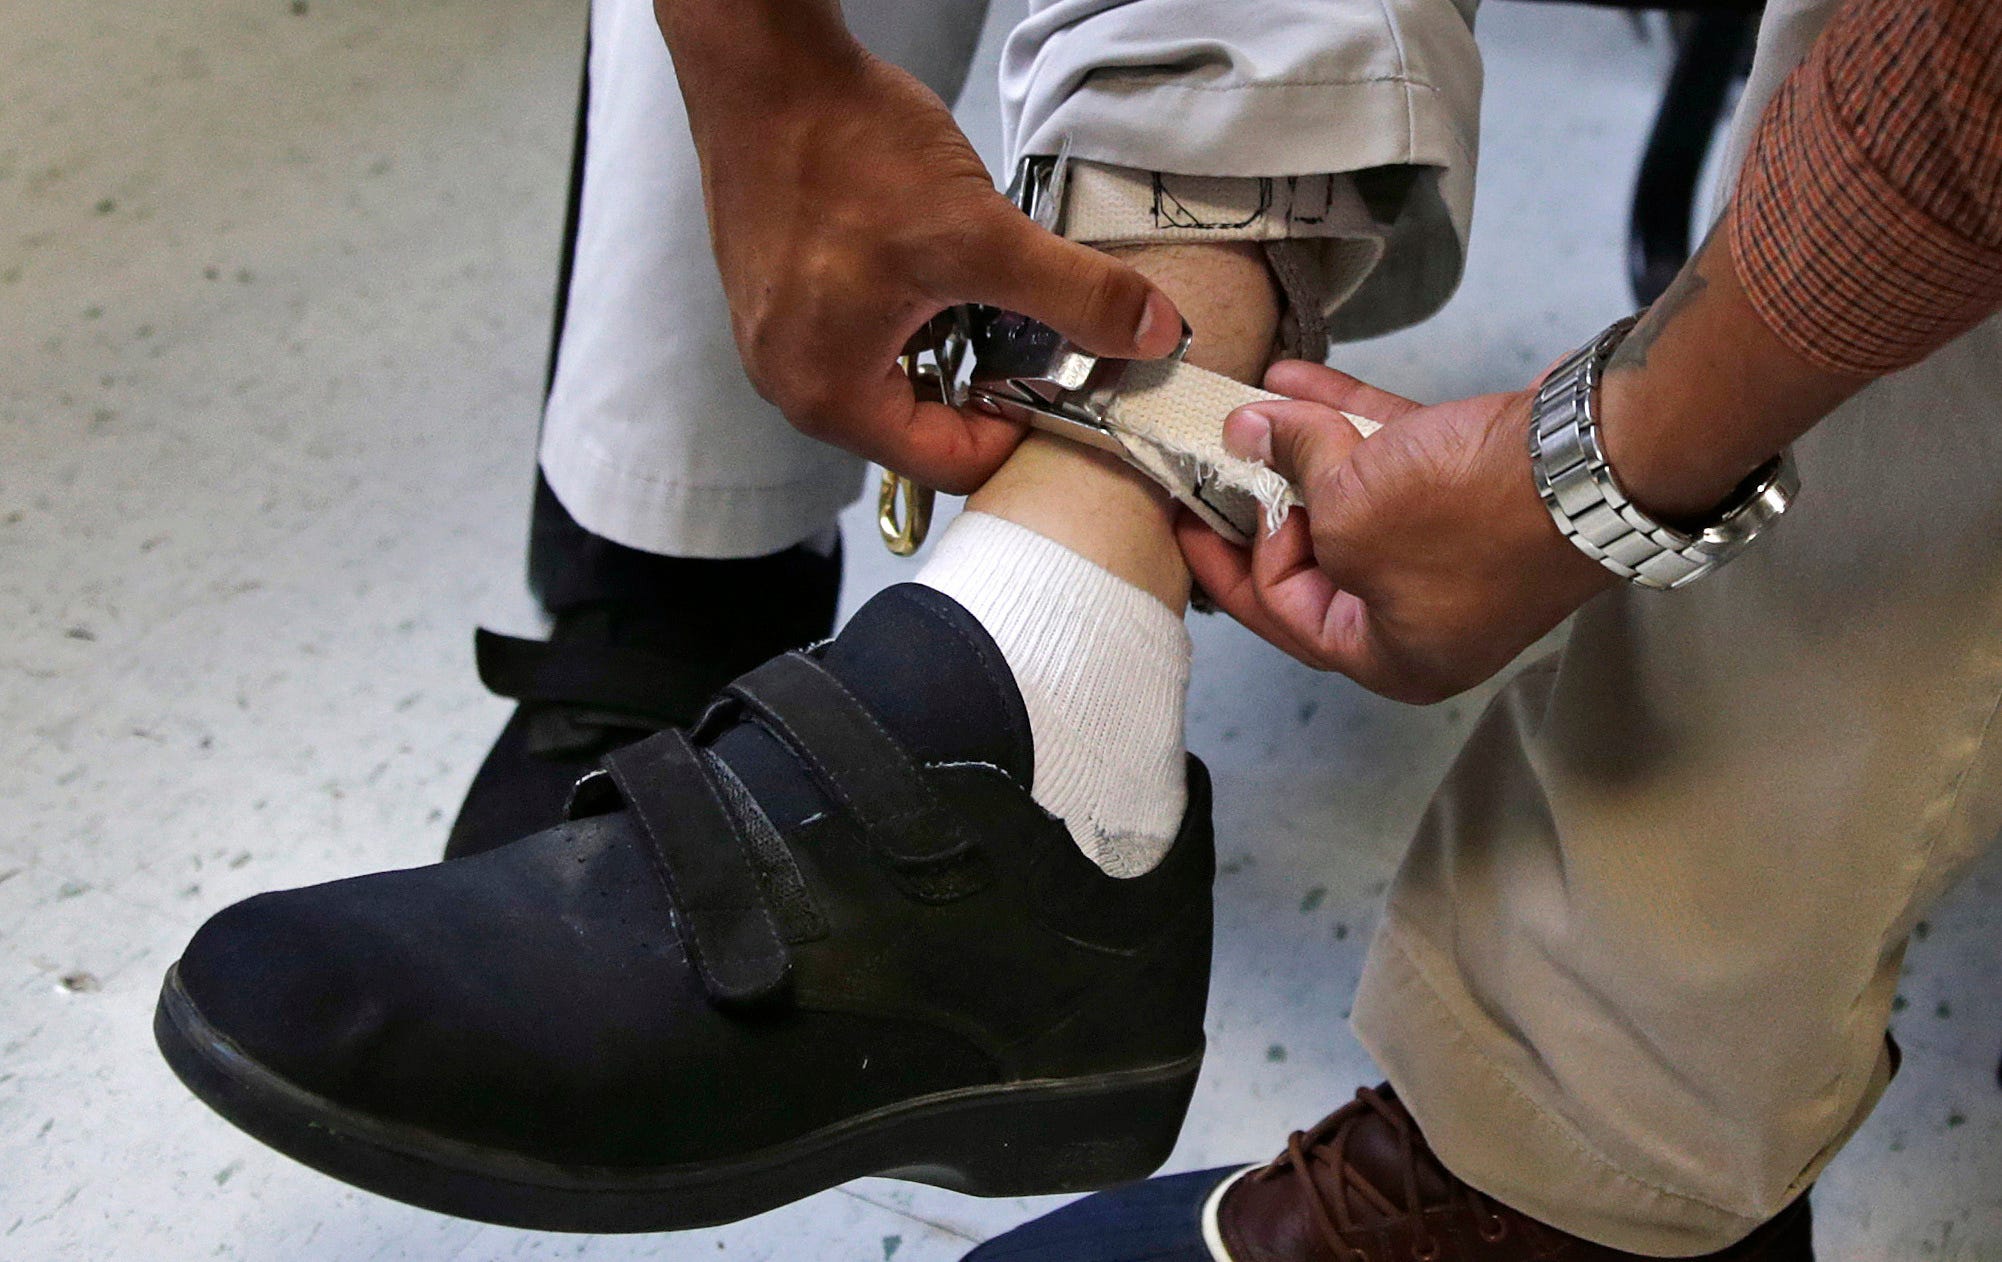 FILE - In this Aug. 13, 2014 file photo, a therapist checks the ankle strap of an electrical shocking device on a student during an exercise program at the Judge Rotenberg Educational Center in Canton, Mass. The student, who was born with a developmental disorder, wears the device so administrators can control violent episodes. On Wednesday, March 4, 2020, the U.S. Food and Drug Administration announced it is banning a class of controversial devices used to discourage aggressive, self-injurious behavior in patients with mental disabilities. (AP Photo/Charles Krupa)